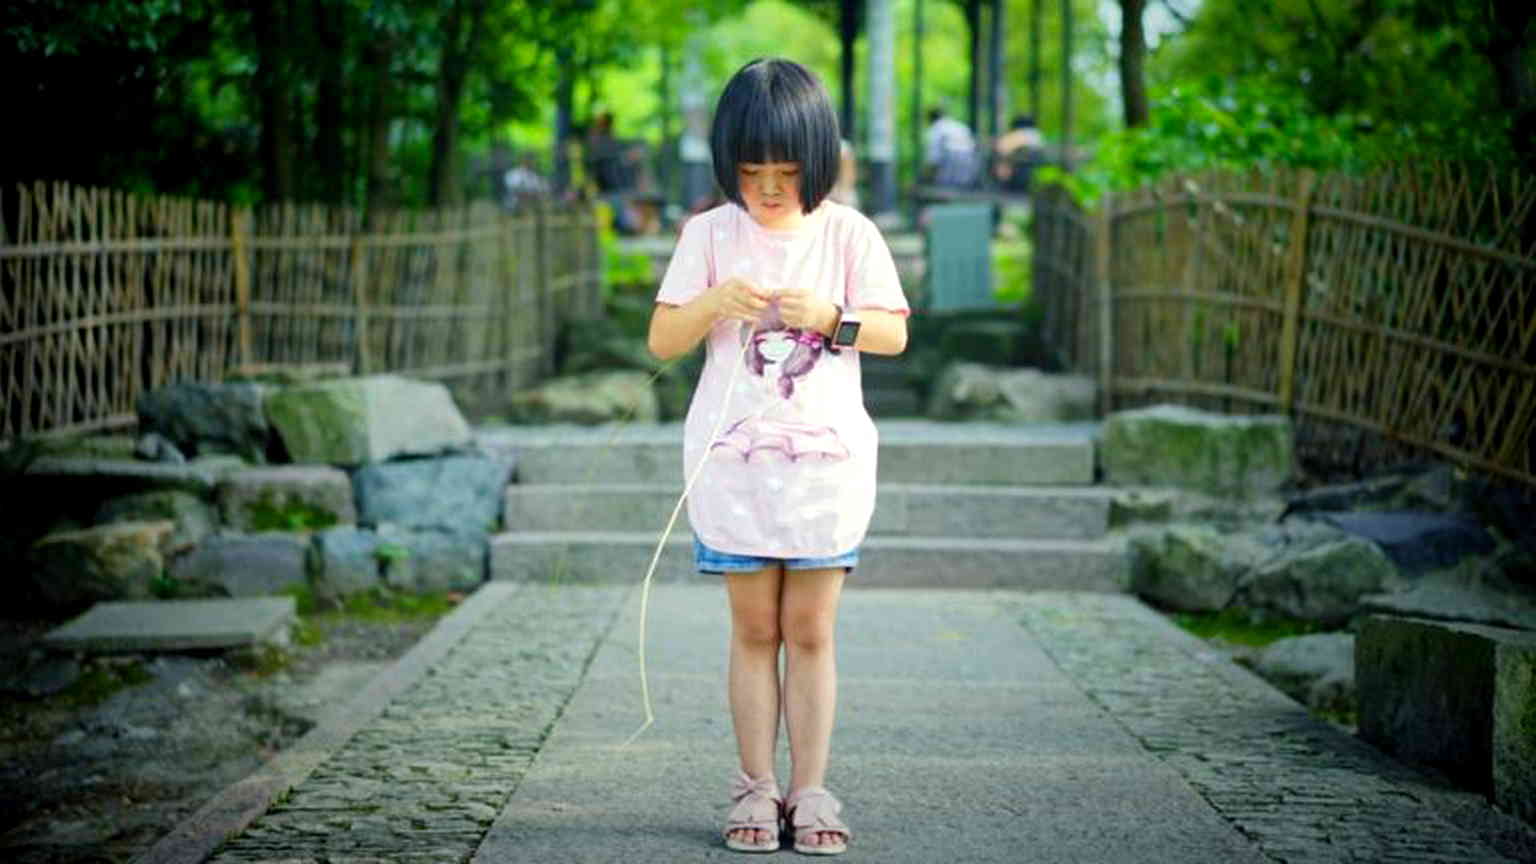 Why daughters in Chinese families that favor sons often lose friendships, feel suicidal: study